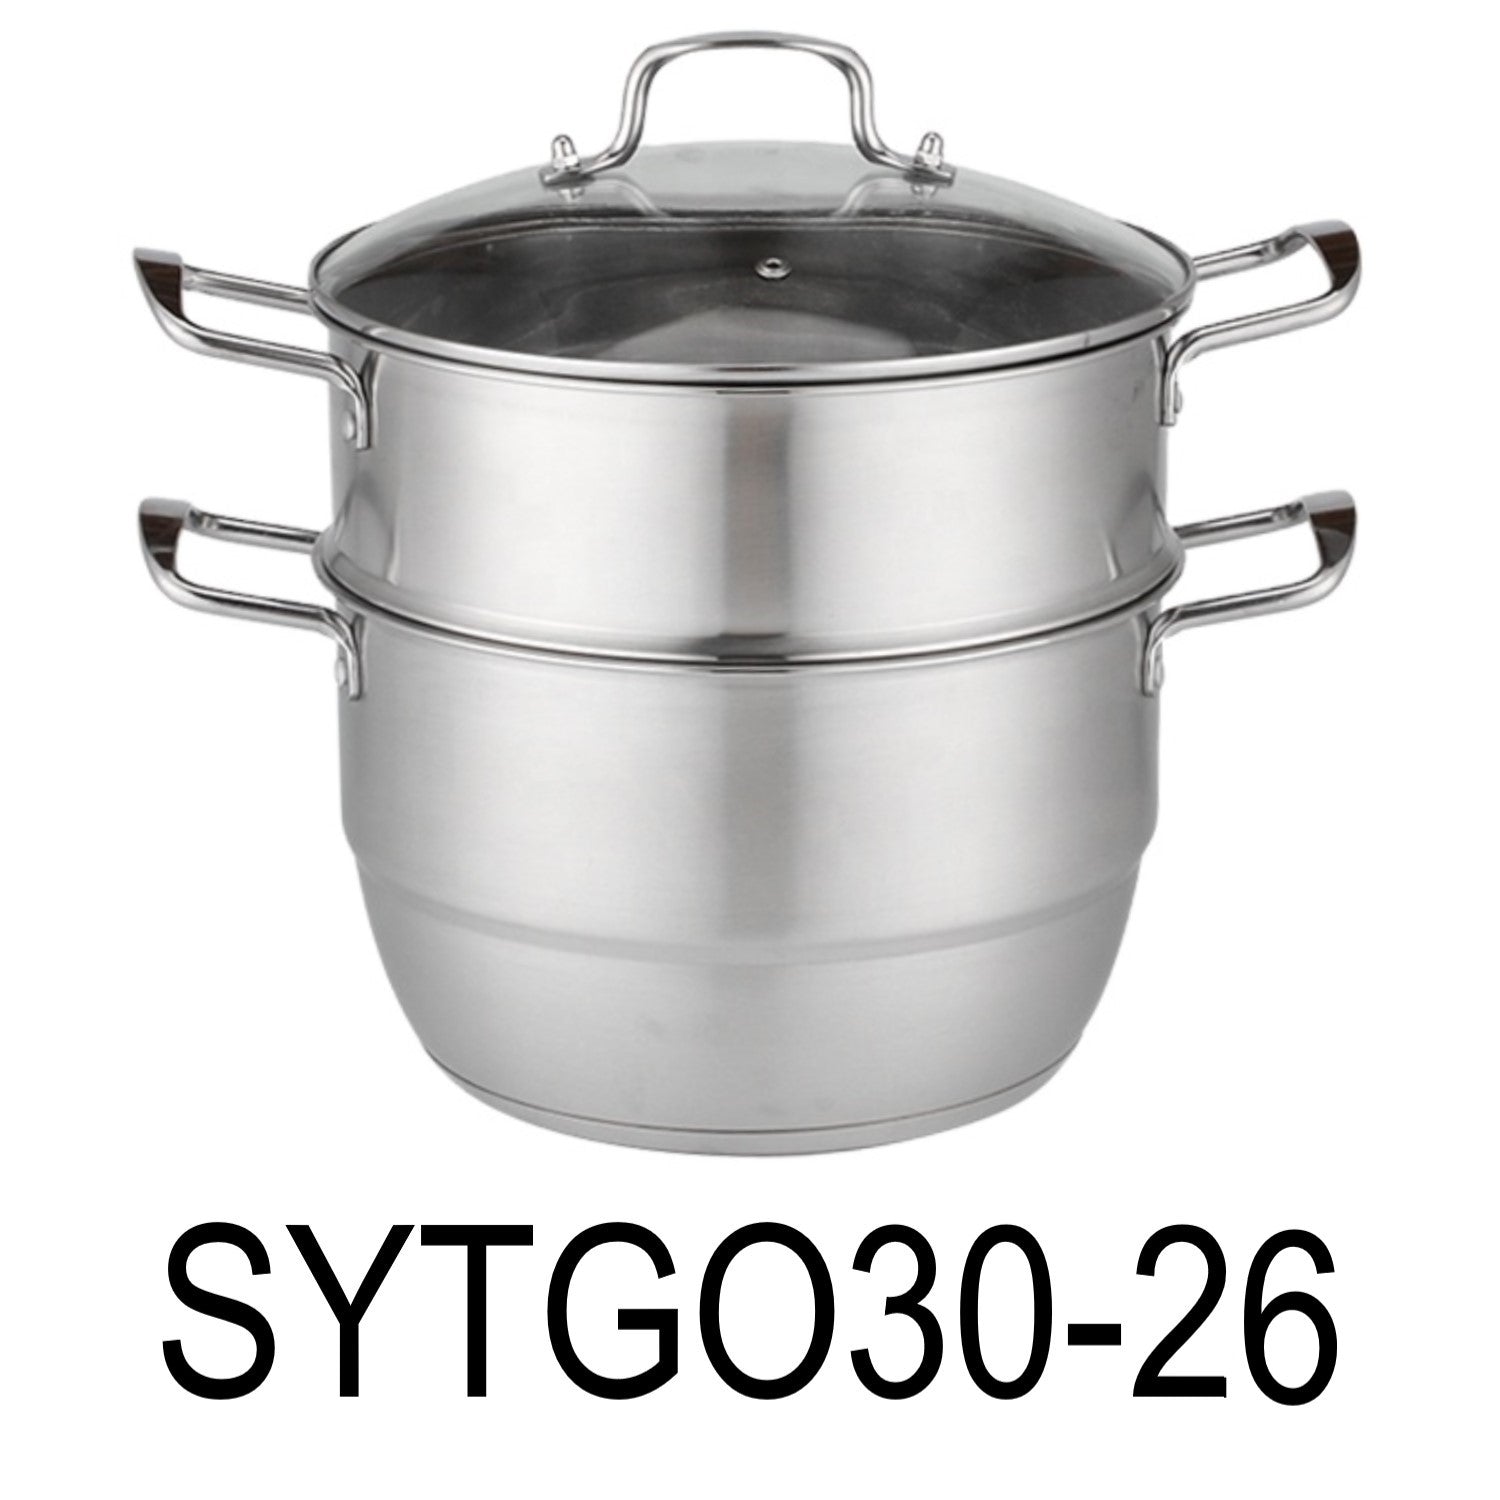  Steamer pot/Stockpot Stainless steel extra-thick